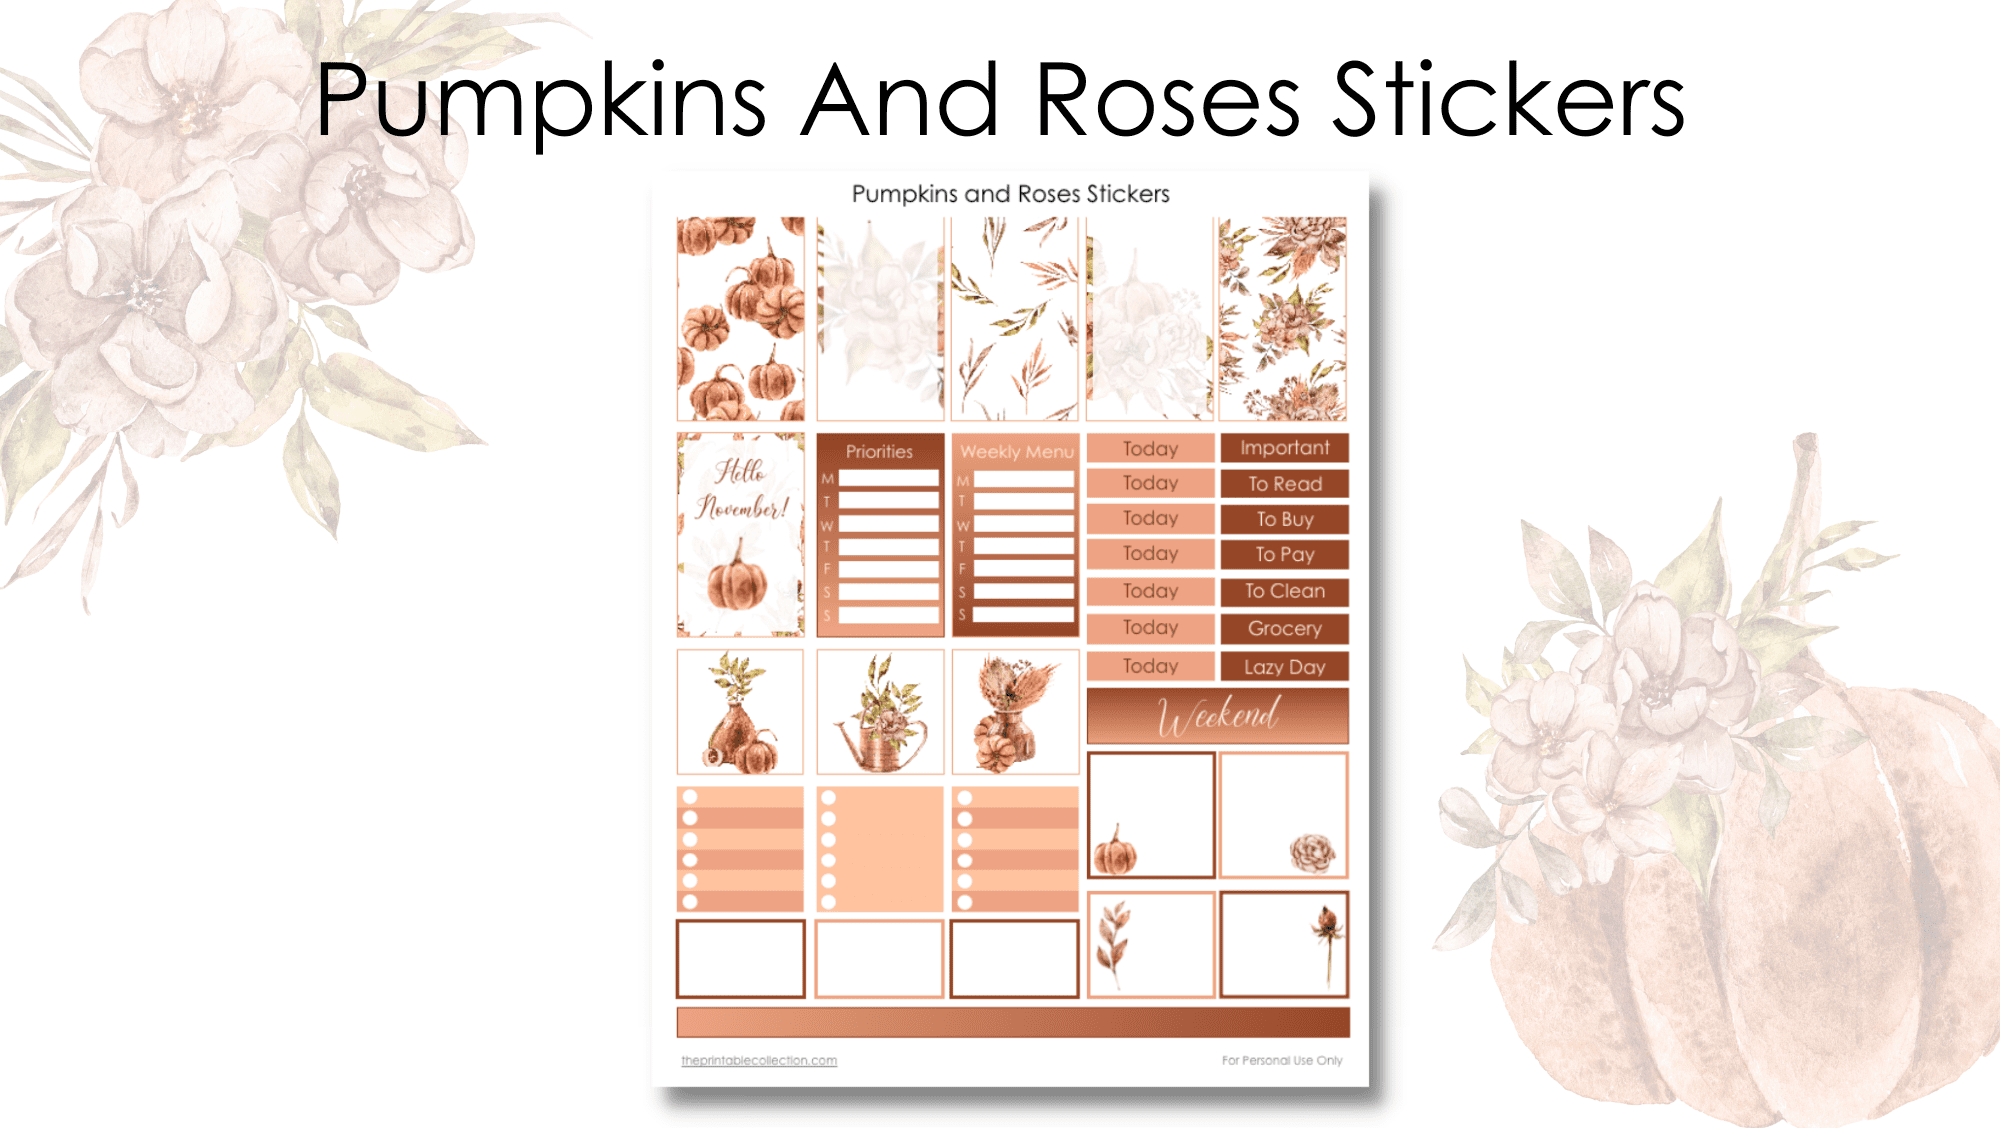 Printable Pumpkins and Roses stickers from The Printable Stickers